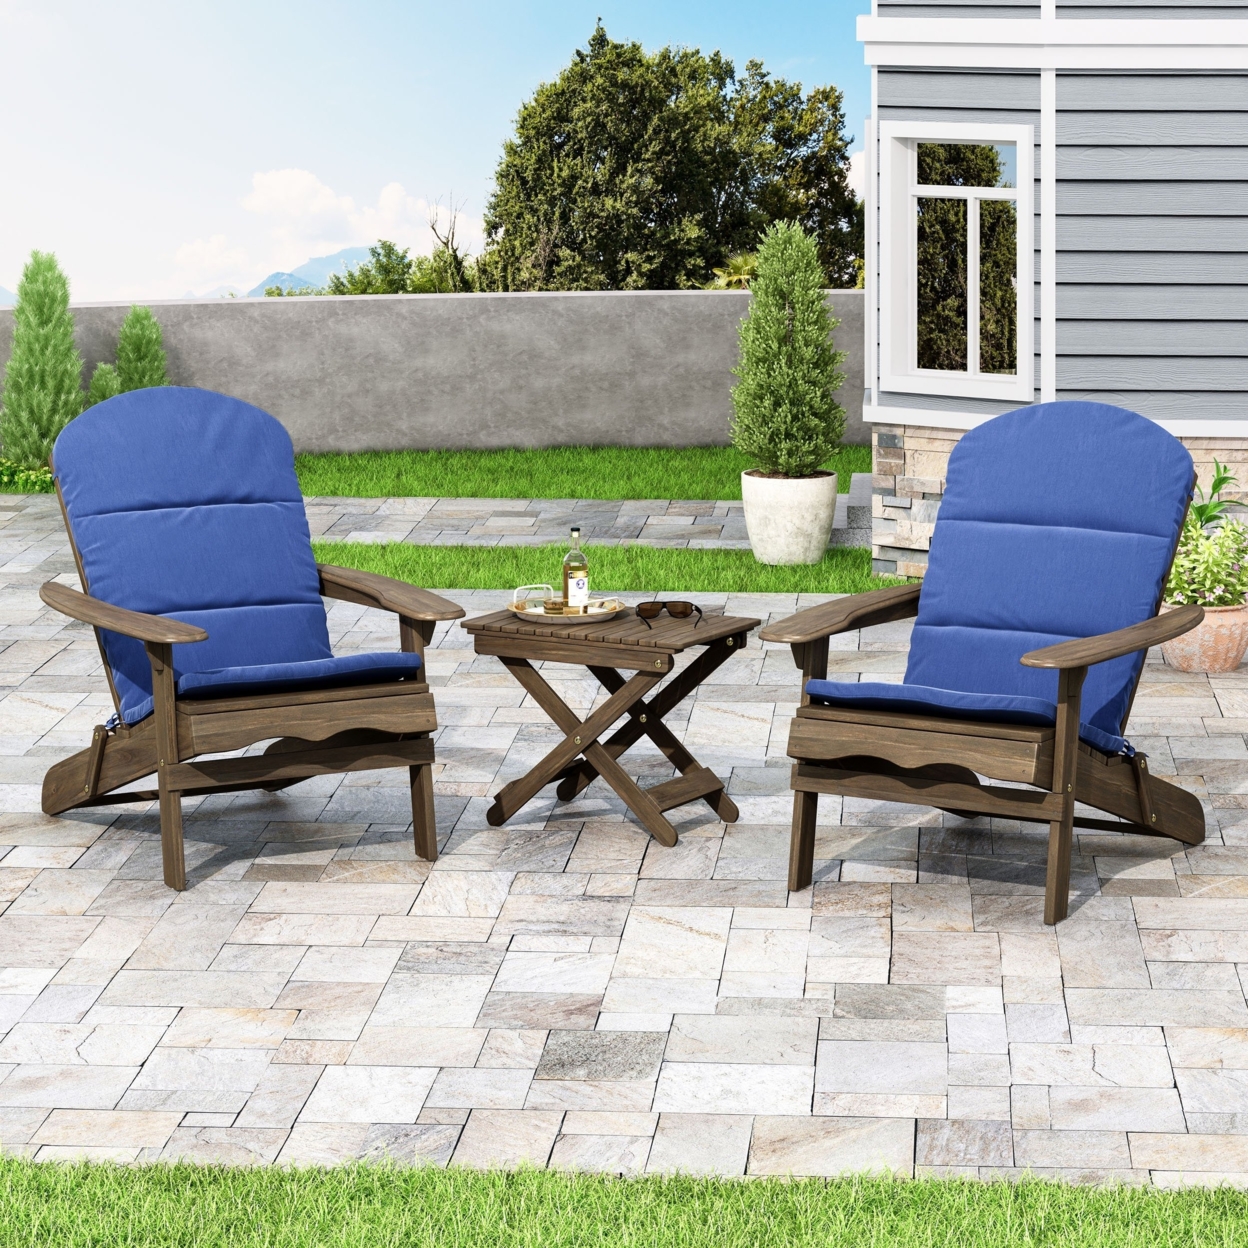 Reed Outdoor 2 Seater Acacia Wood Chat Set With Water Resistant Cushions - Gray/navy Blue